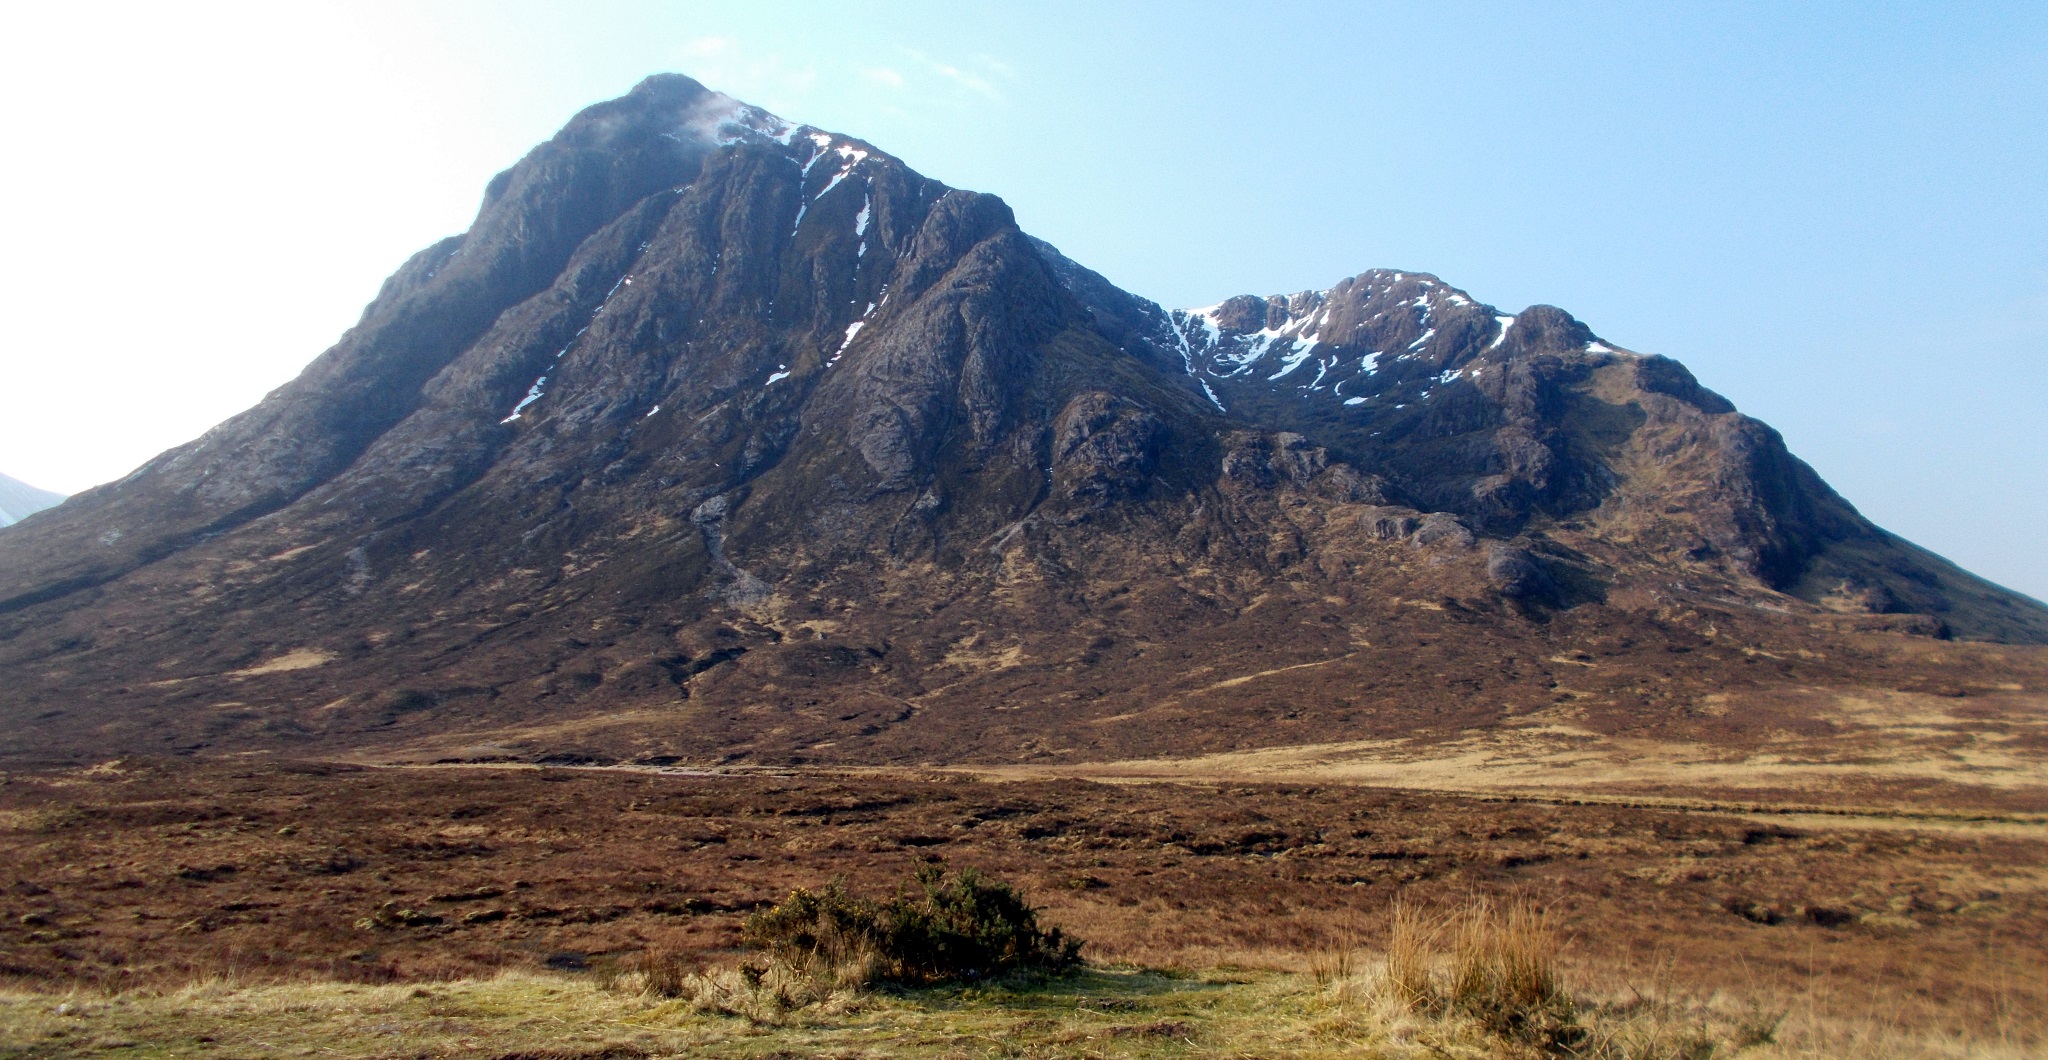 Buachaille Etive Mor from the West Highland Way in Glencoe in the Highlands of Scotland